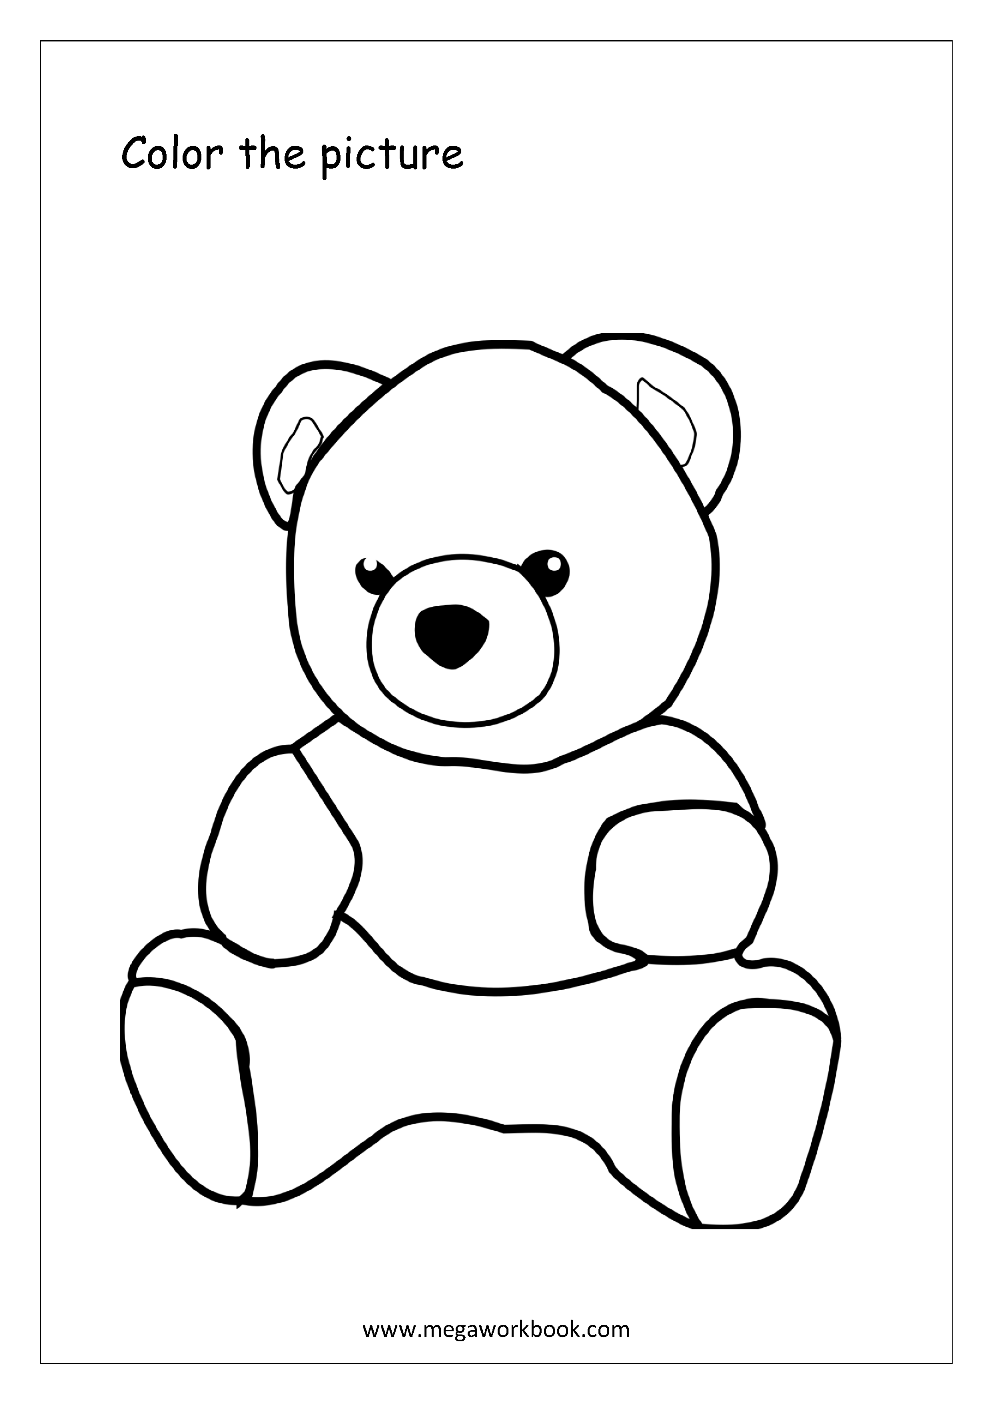 Free Coloring Sheets - Miscellaneous - MegaWorkbook